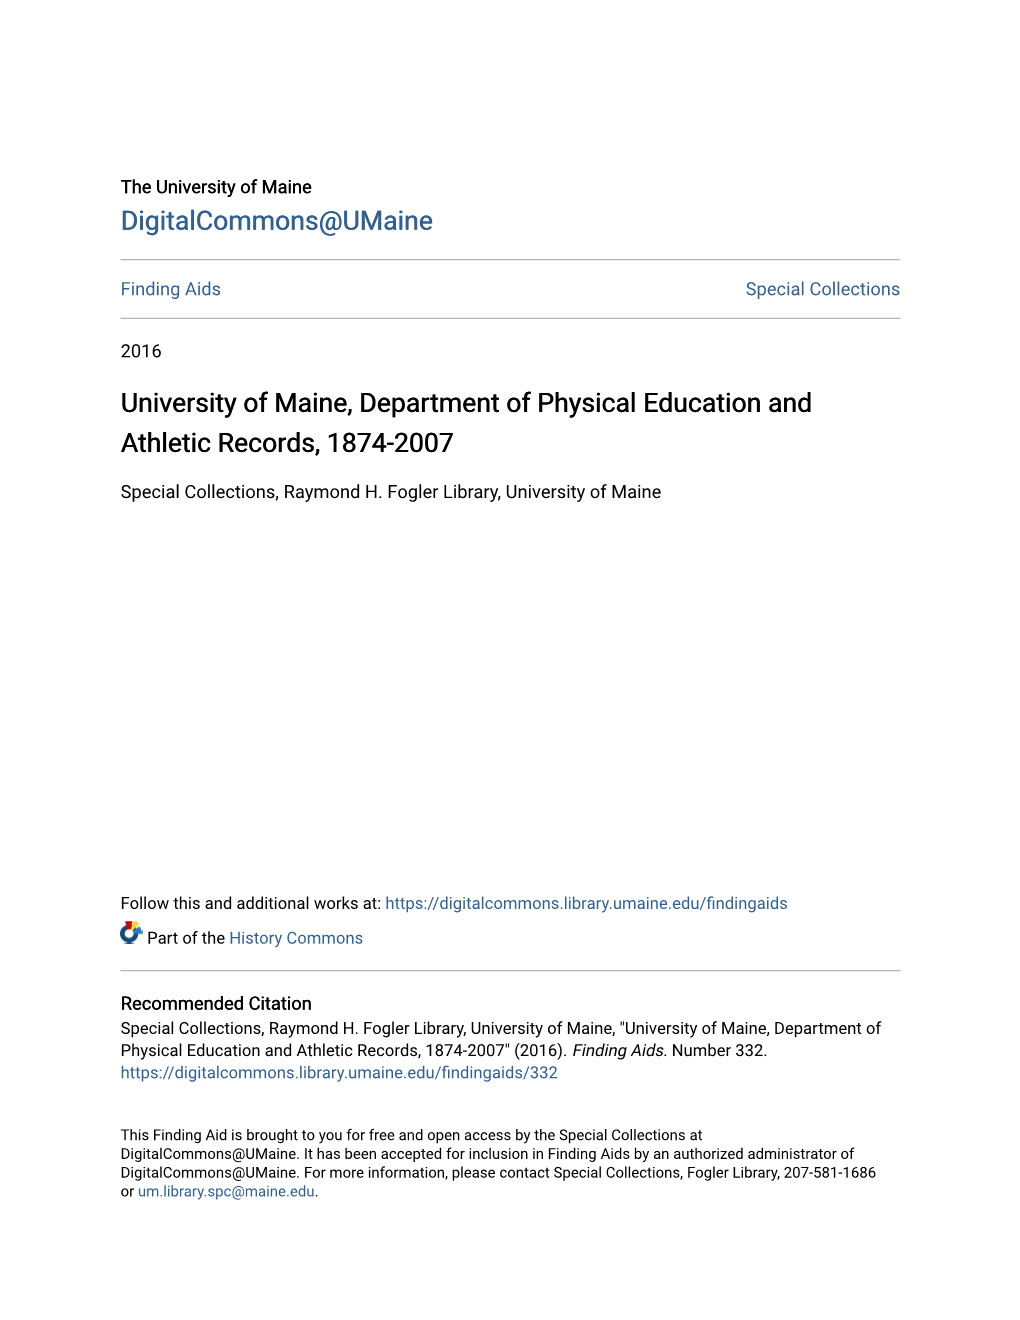 University of Maine, Department of Physical Education and Athletic Records, 1874-2007